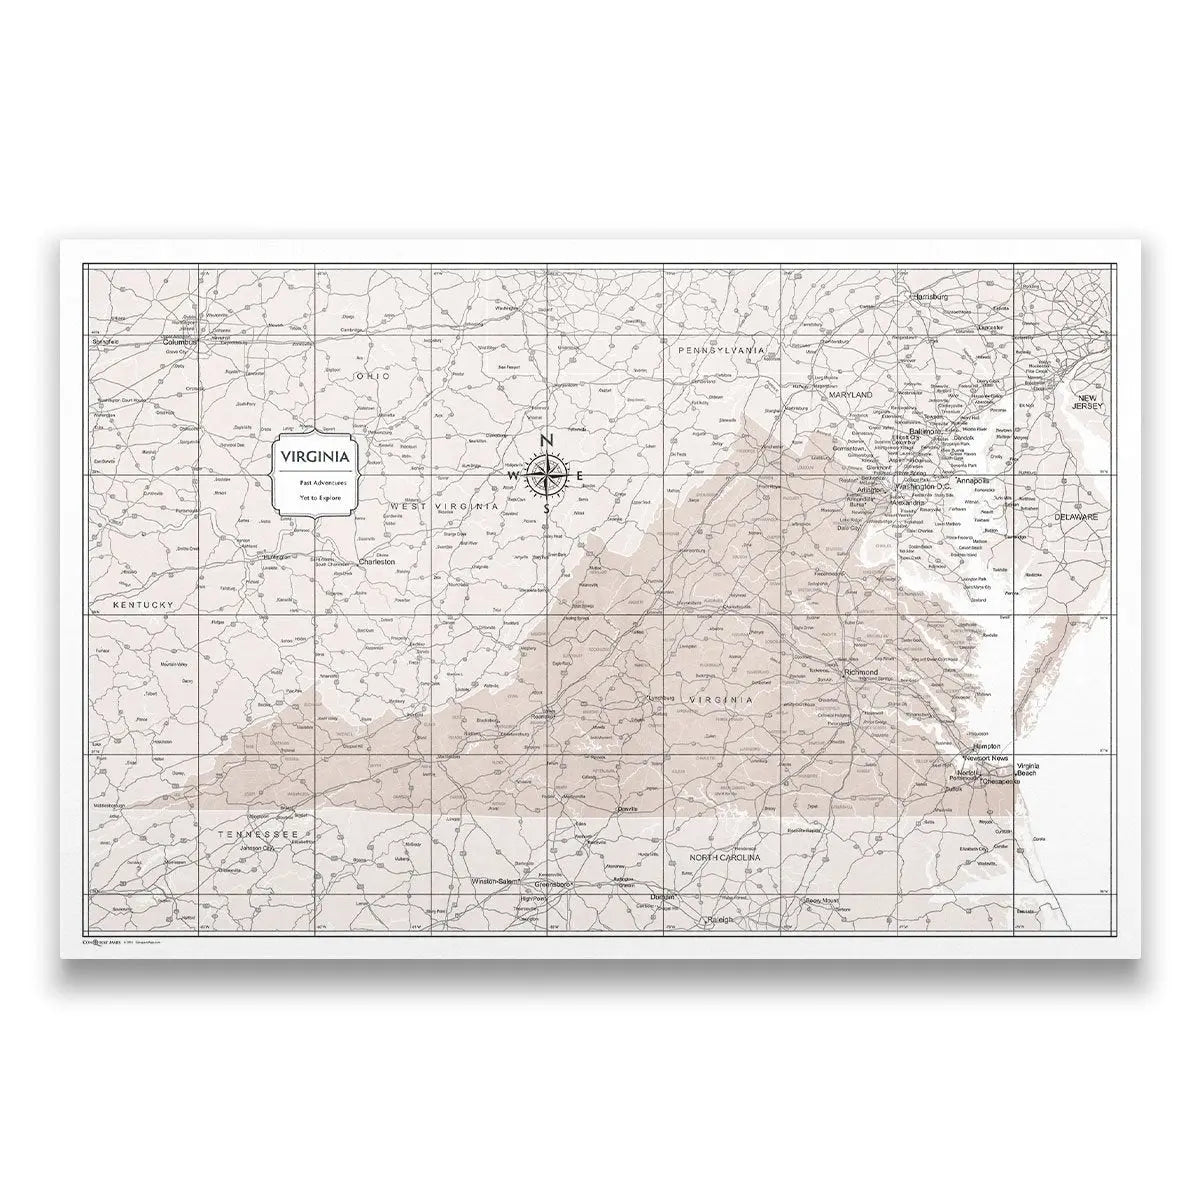 Personalize Your Own Virginia Travel Wall Map